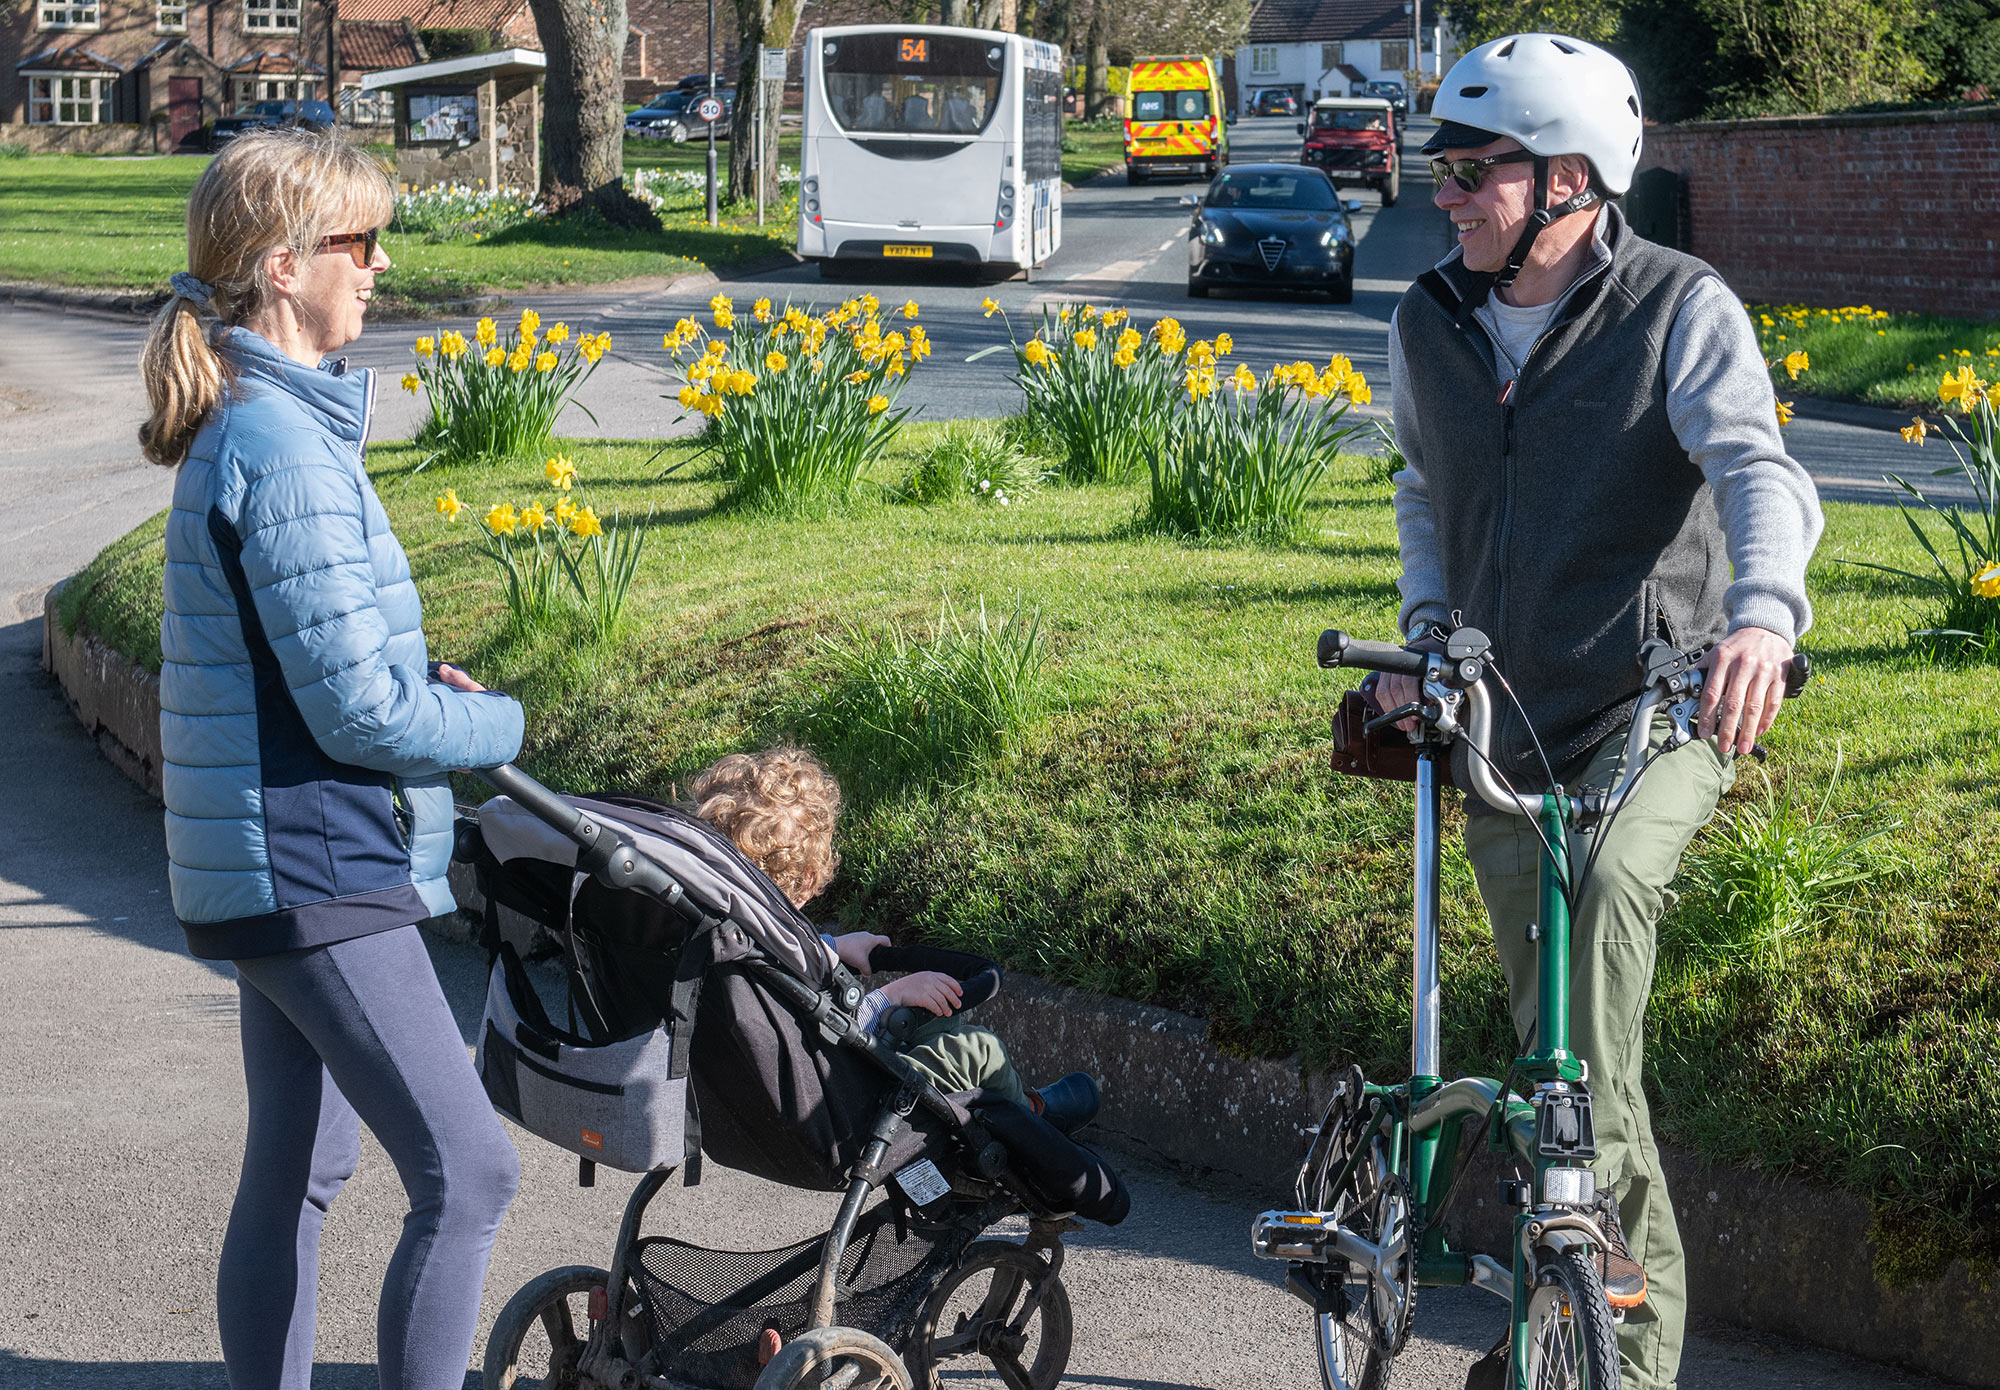 A lady with pushchair talking to a man with a bike